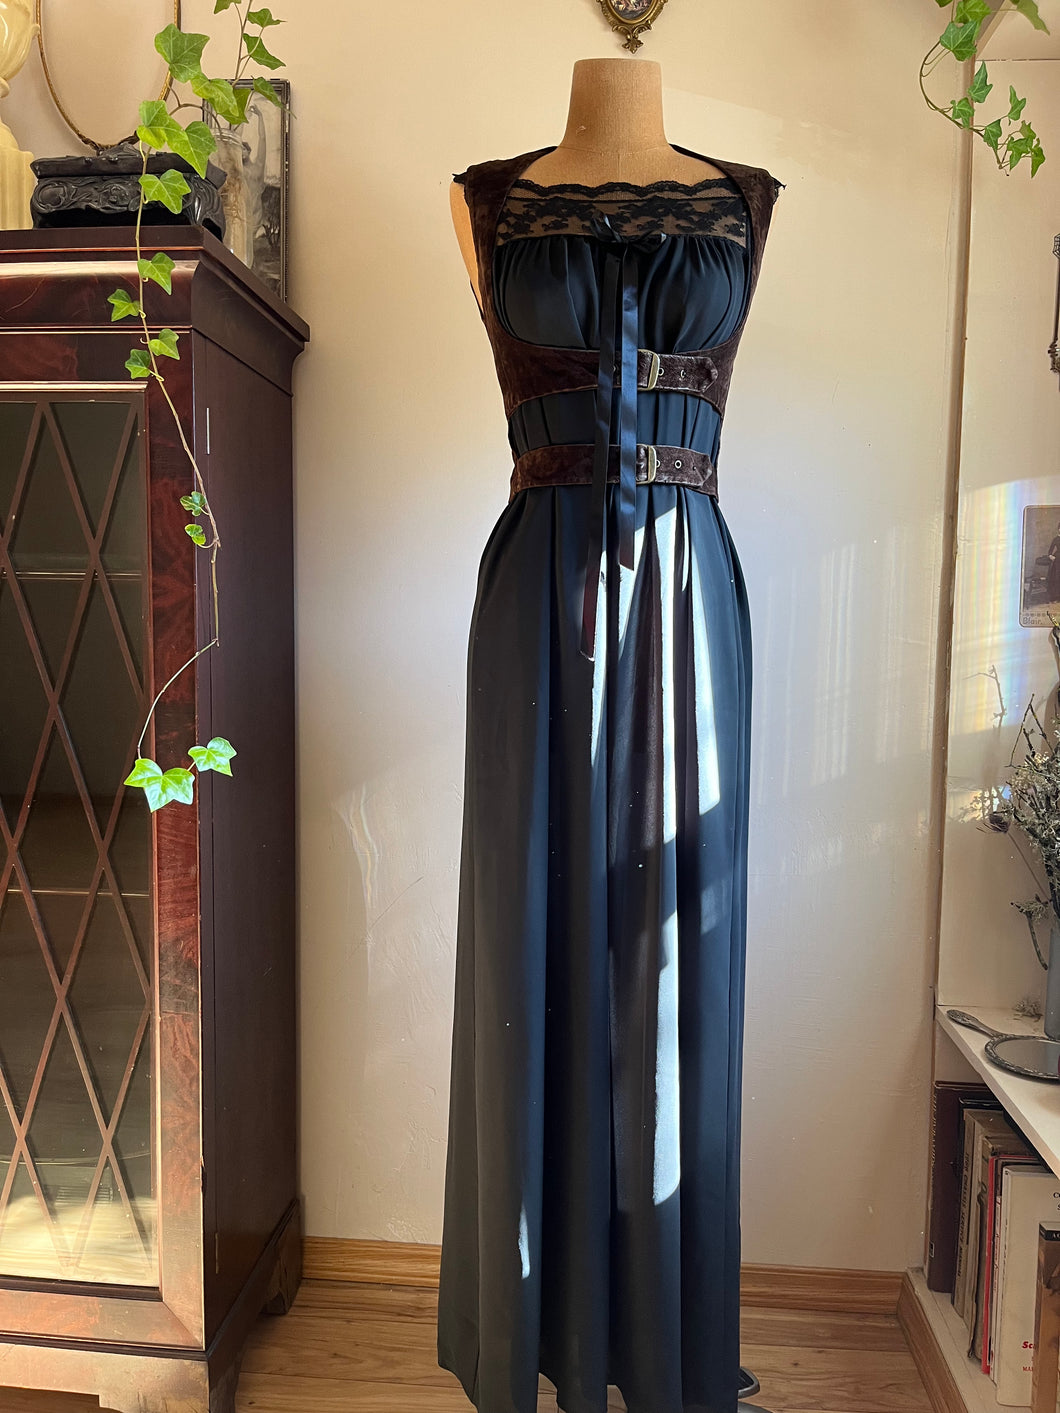 1970’s vintage black nightgown by Deena of California